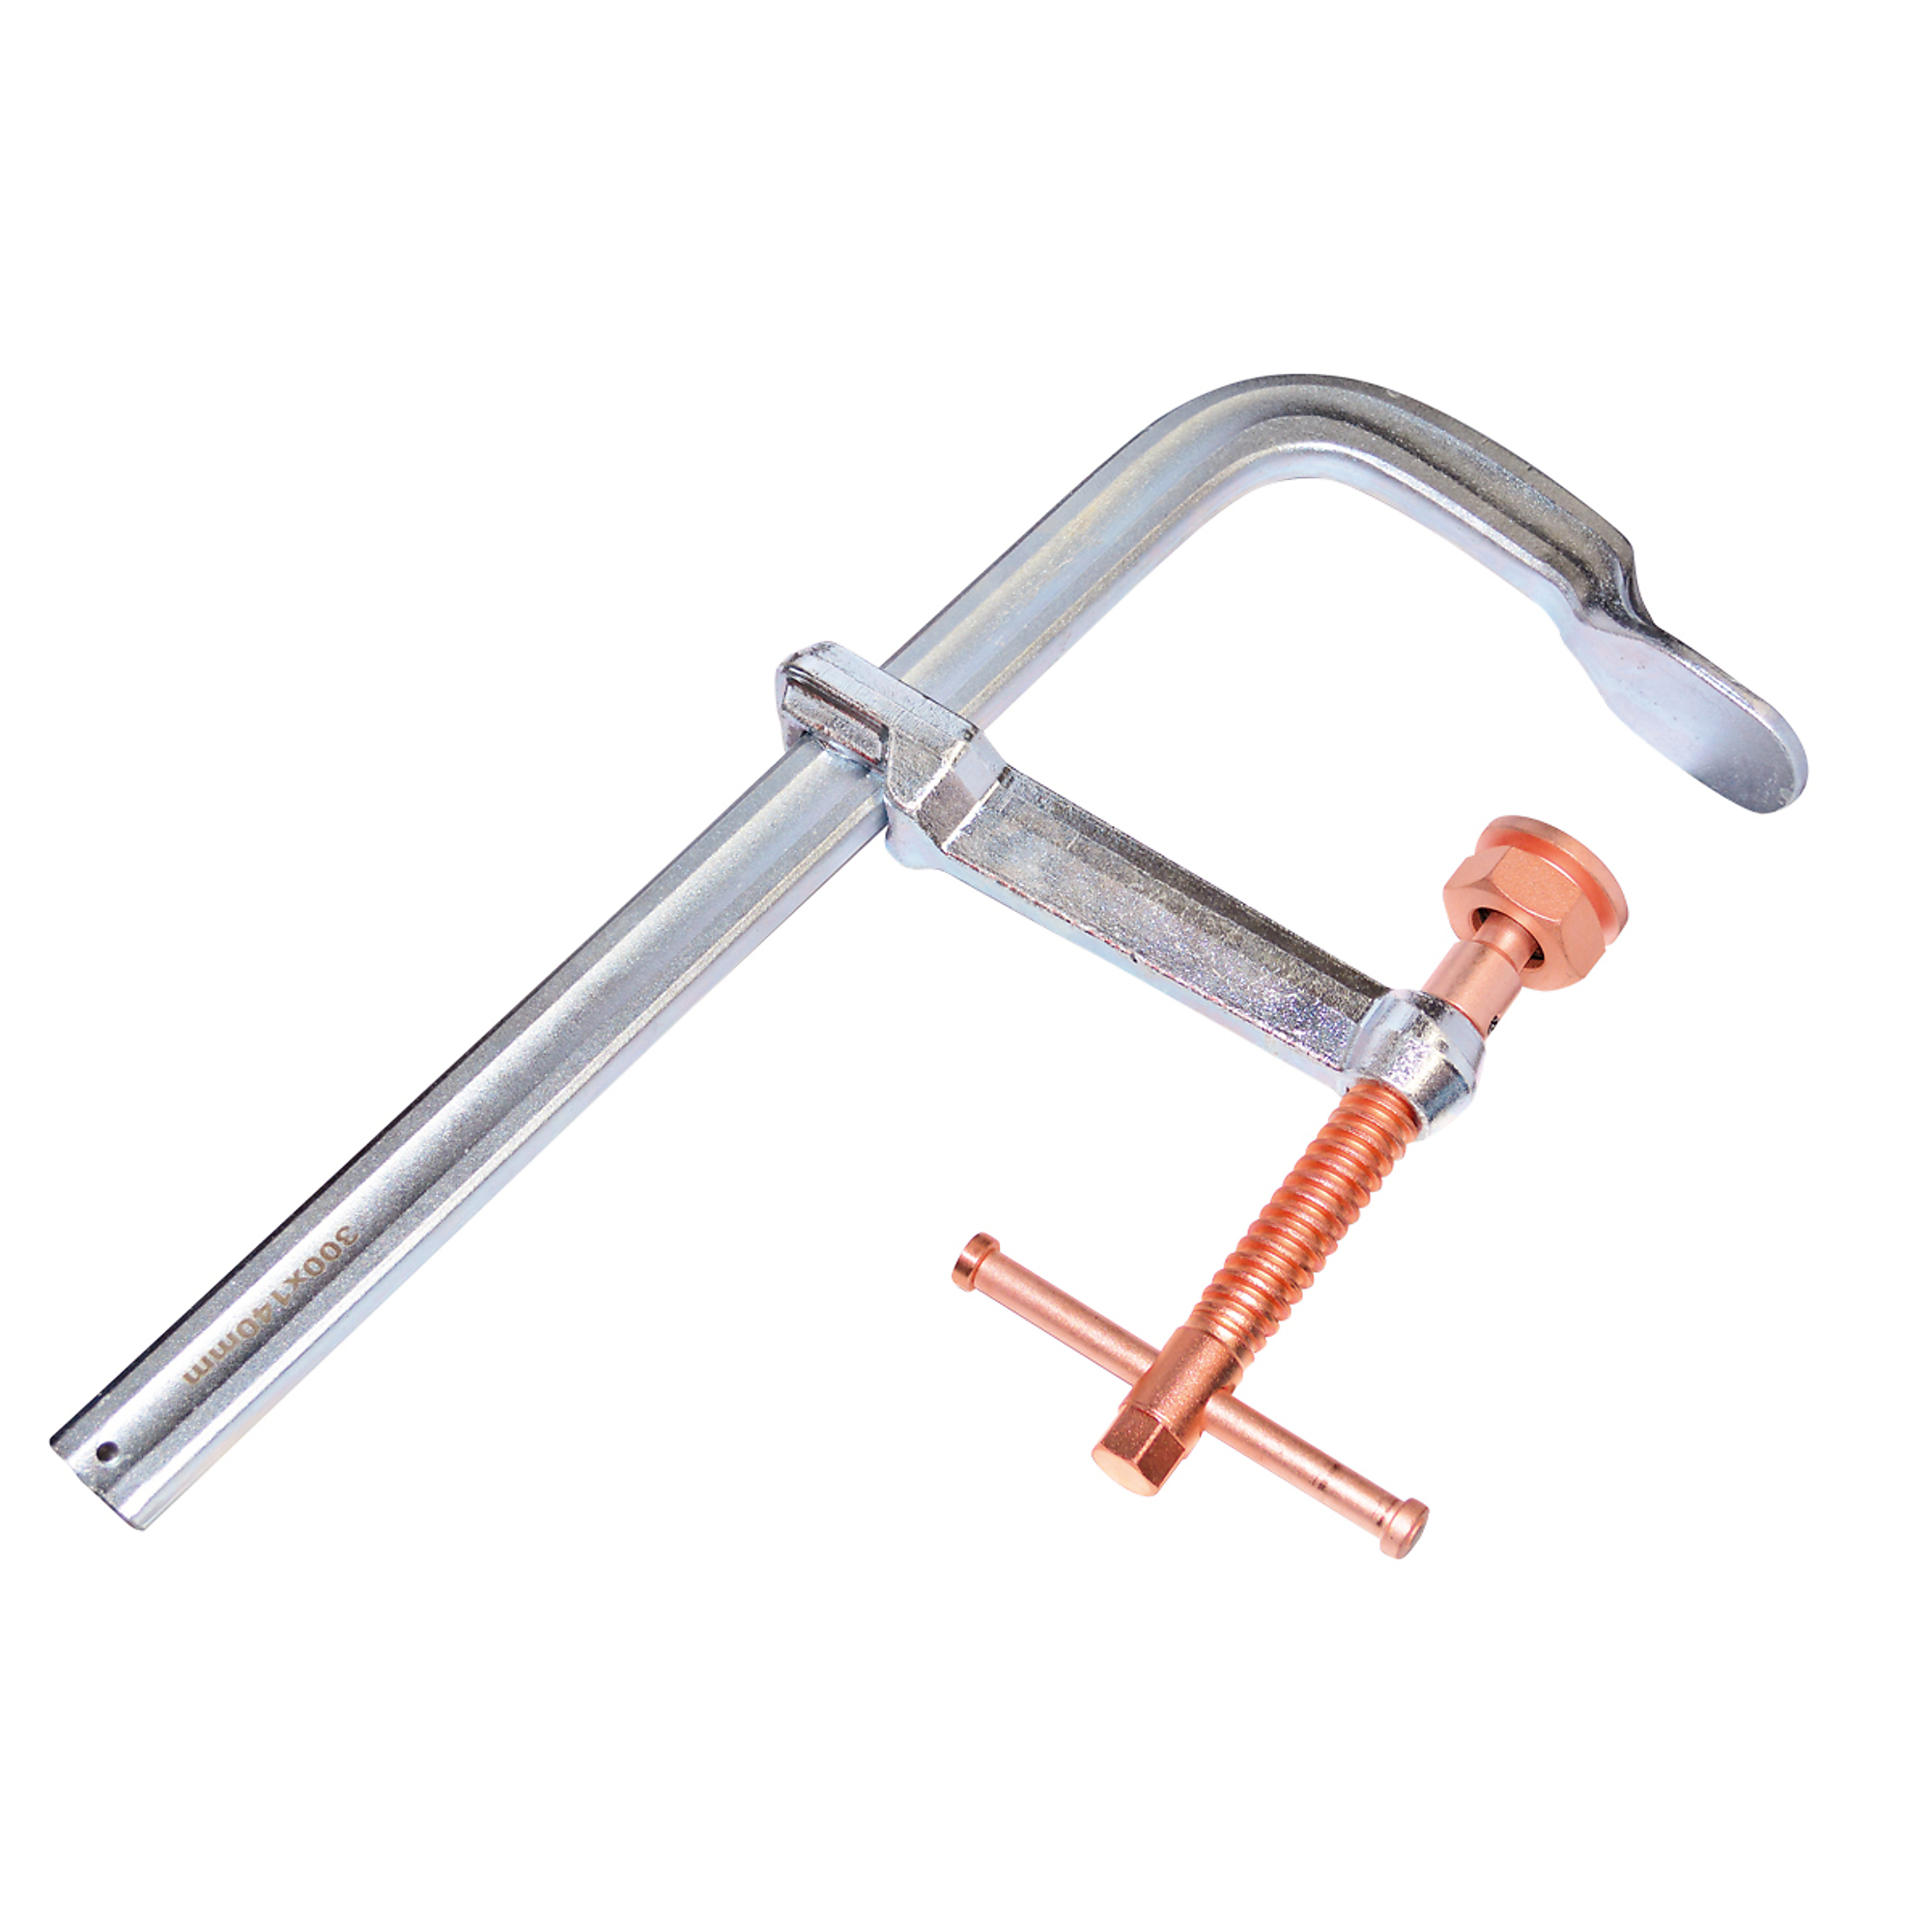 KANCA, HEAVY DUTY CLAMP W. COPPER SCREW 600 MM - 24Inch, Clamp Pressure 2700 lb, Opening Size 24 in, Pieces (qty.) 1 Model Heavy Duty Clamp w. Copper